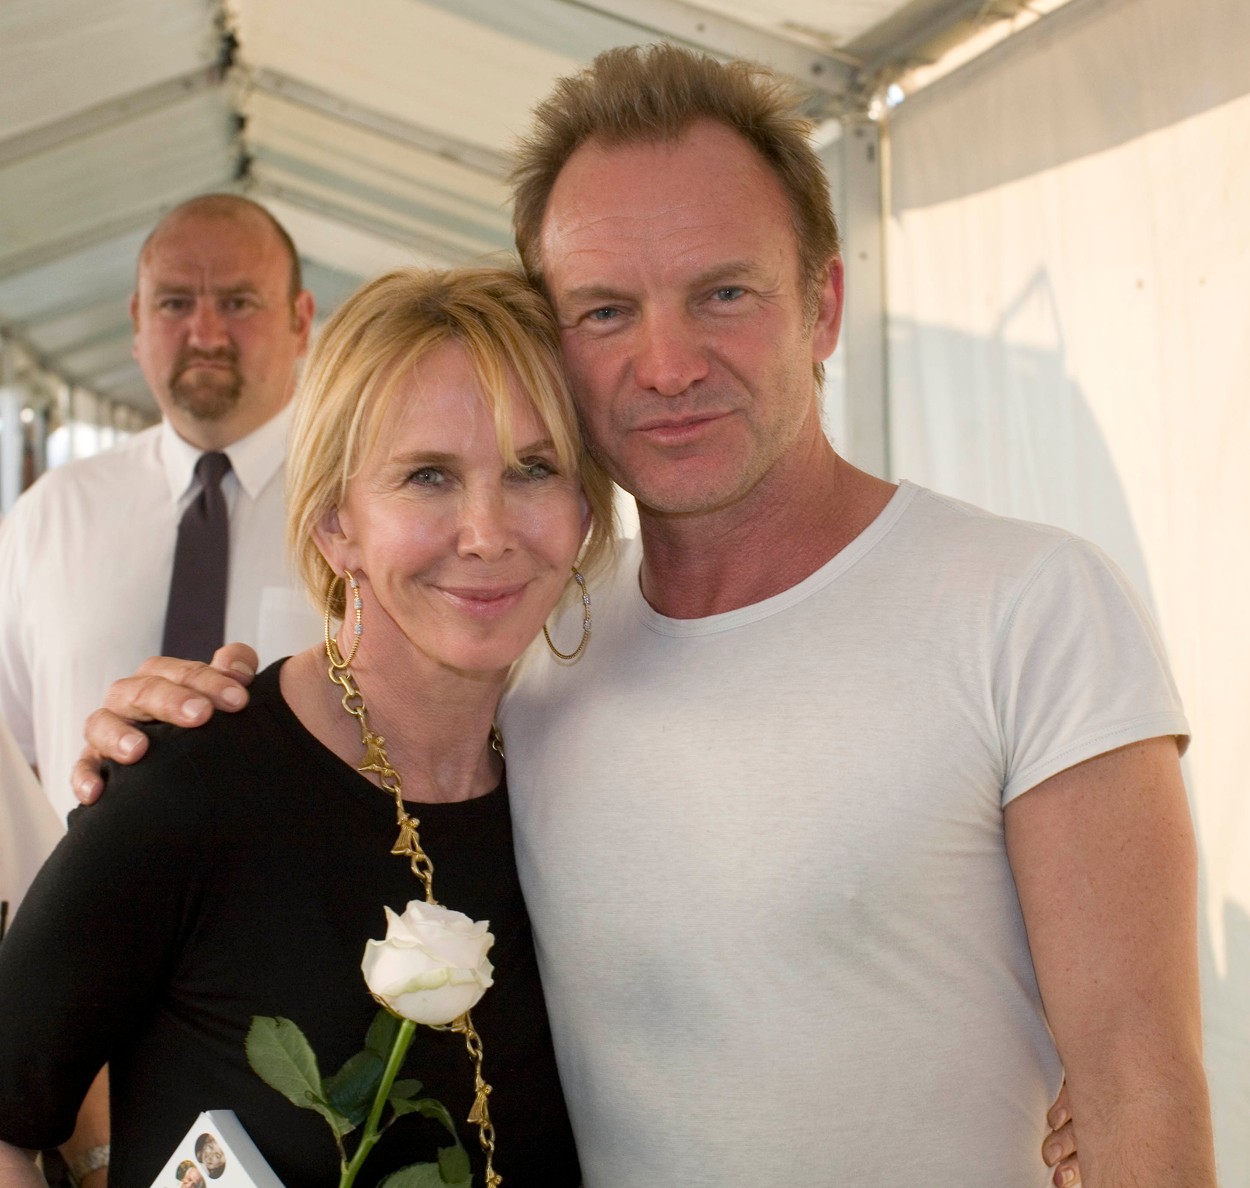 31st May 2009. The Hay Festival, held in Hay on Wye, Herefordshire, UK.  Among those attending, Sting with his wife Trudi Styler., Image: 33782637, License: Rights-managed, Restrictions: , Model Release: no, Credit line: GoffPhotos.com / Goff Photos / Profimedia